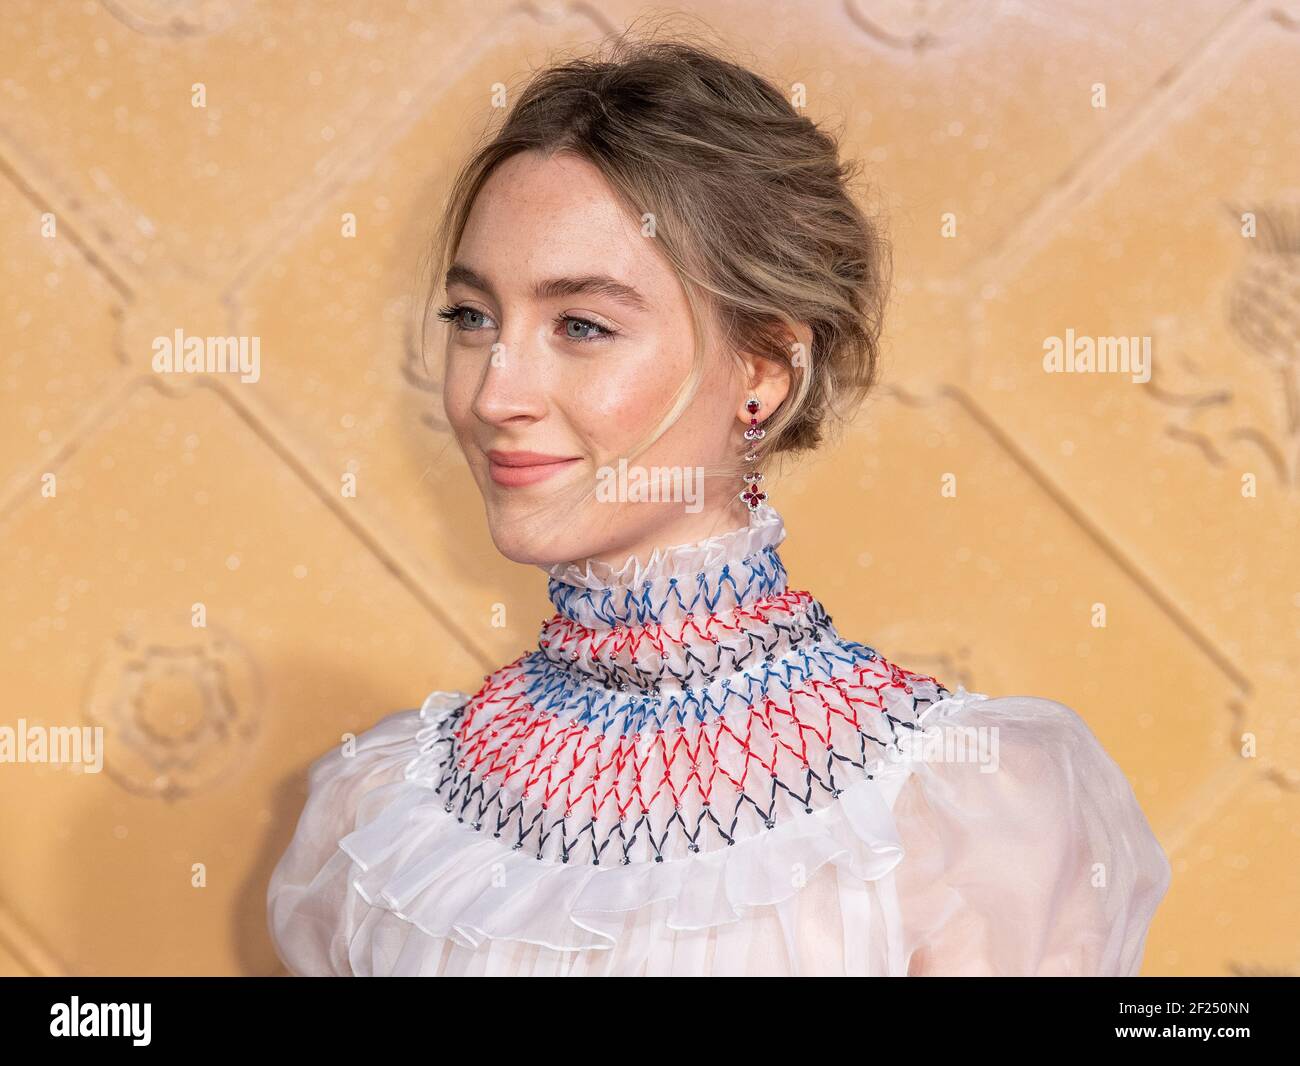 London, United Kingdom. 11th December 2018. Saoirse Ronan attending 'Mary Queen of Scots' film premiere, Arrivals, London, United Kingdom. Stock Photo